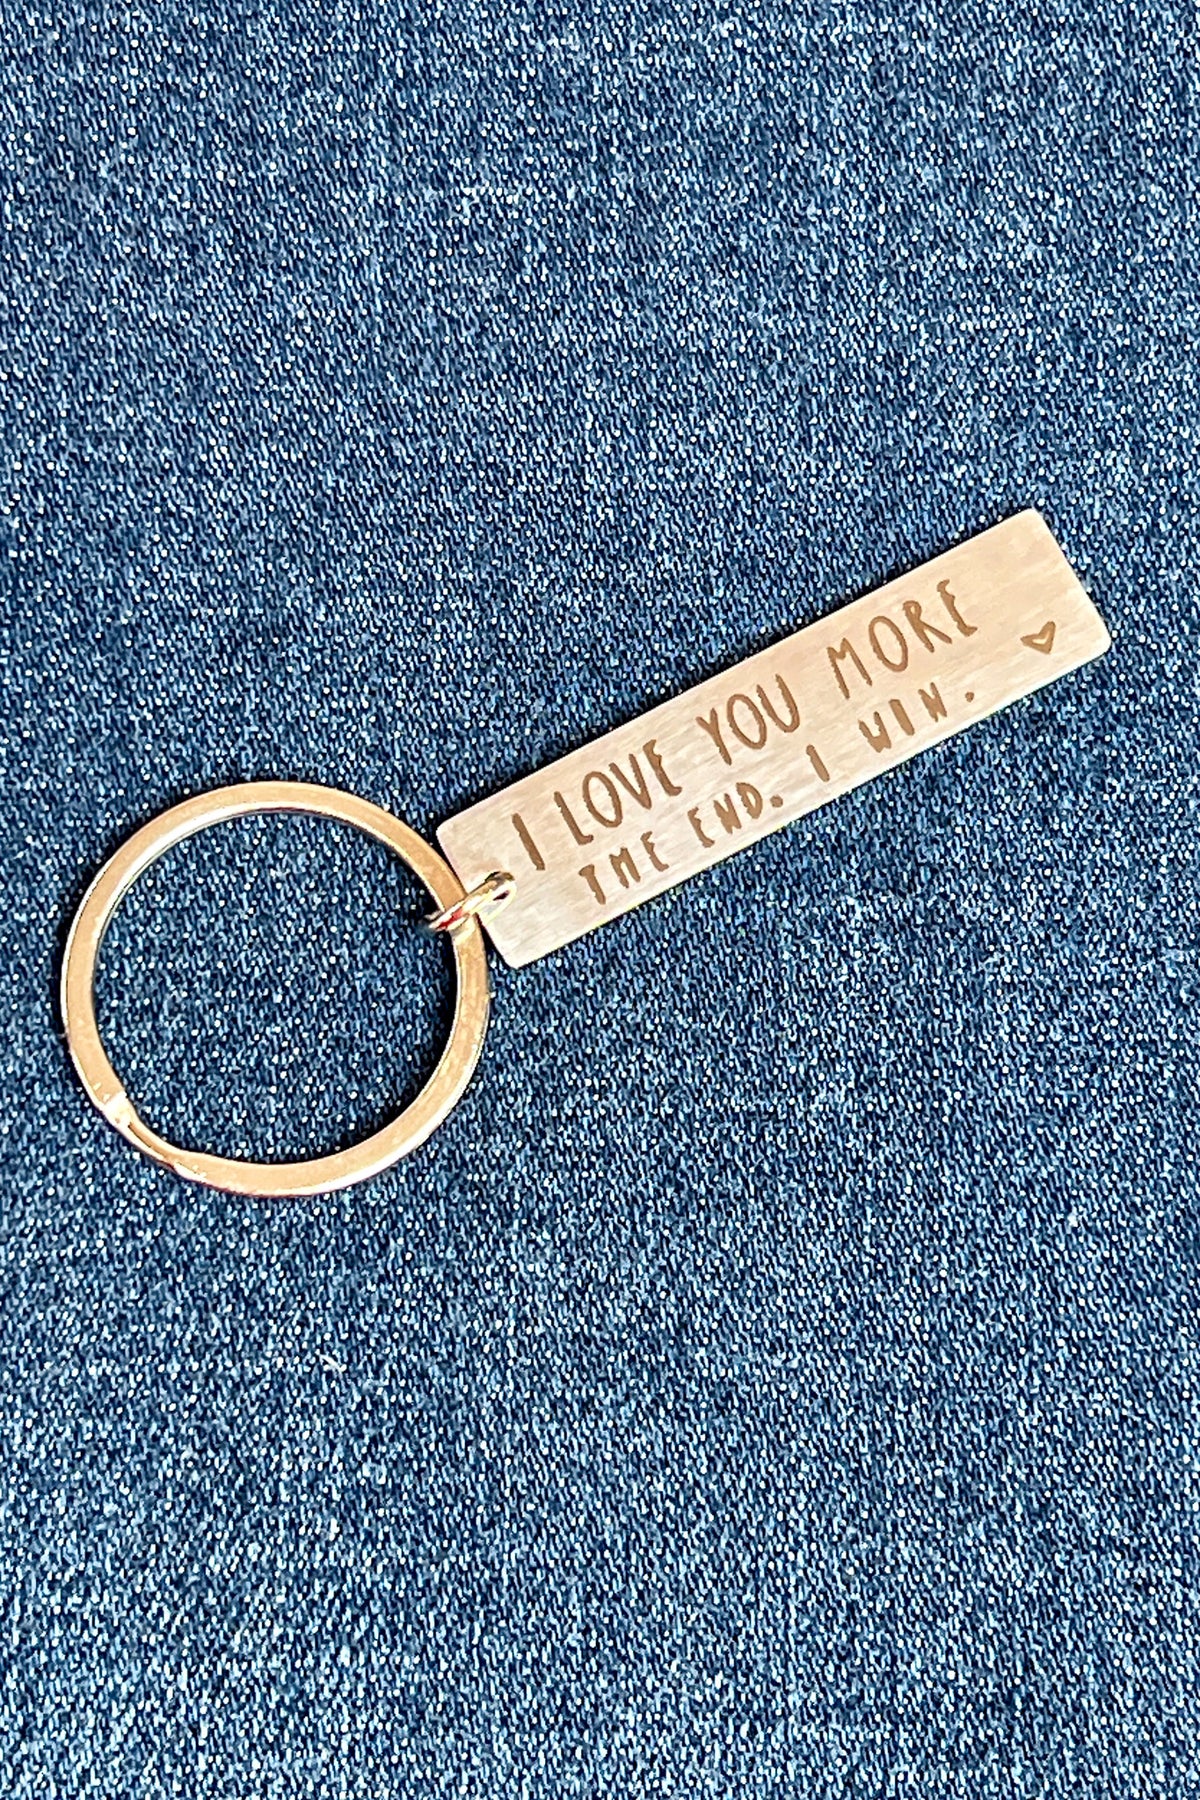 I Love You More! The End. I Win! Keychain